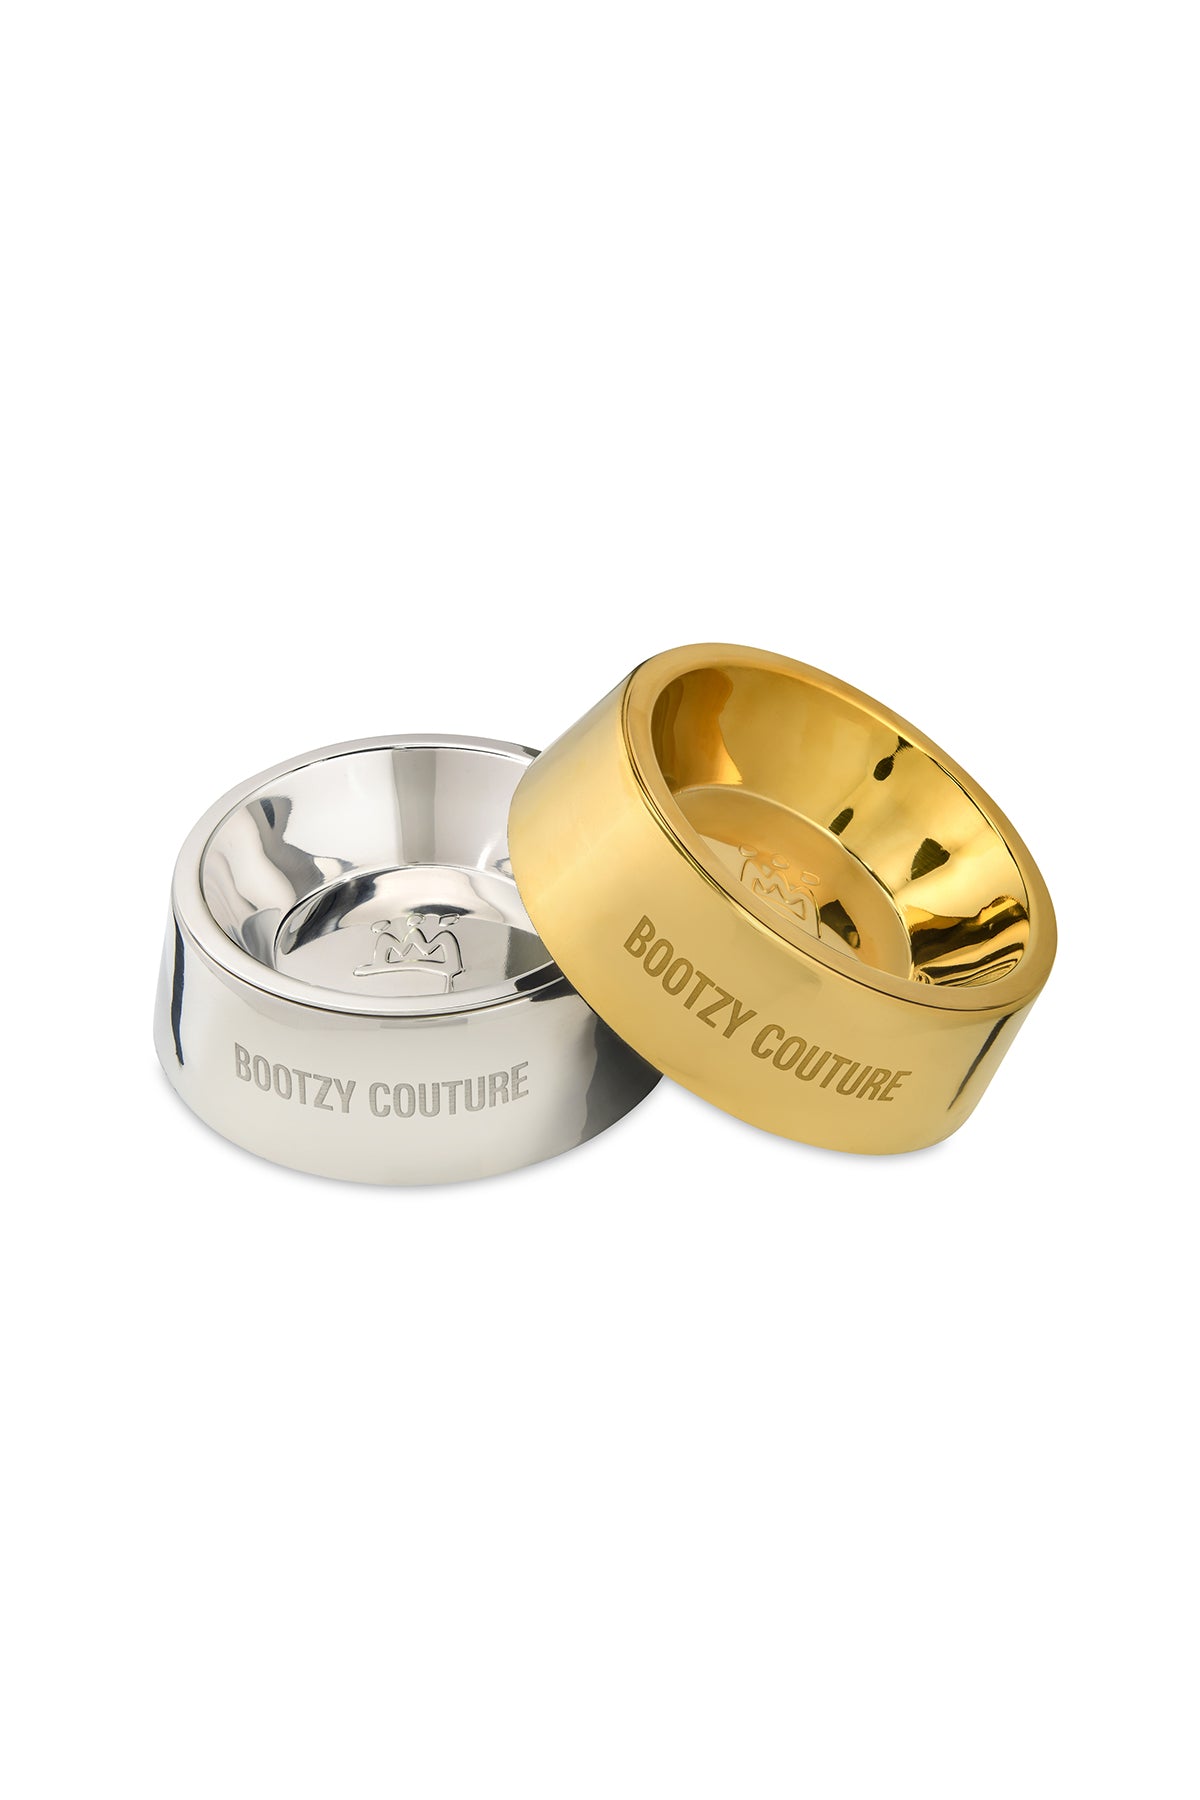 BOOTZY COUTURE | LICK OF SWAGGER BOWL